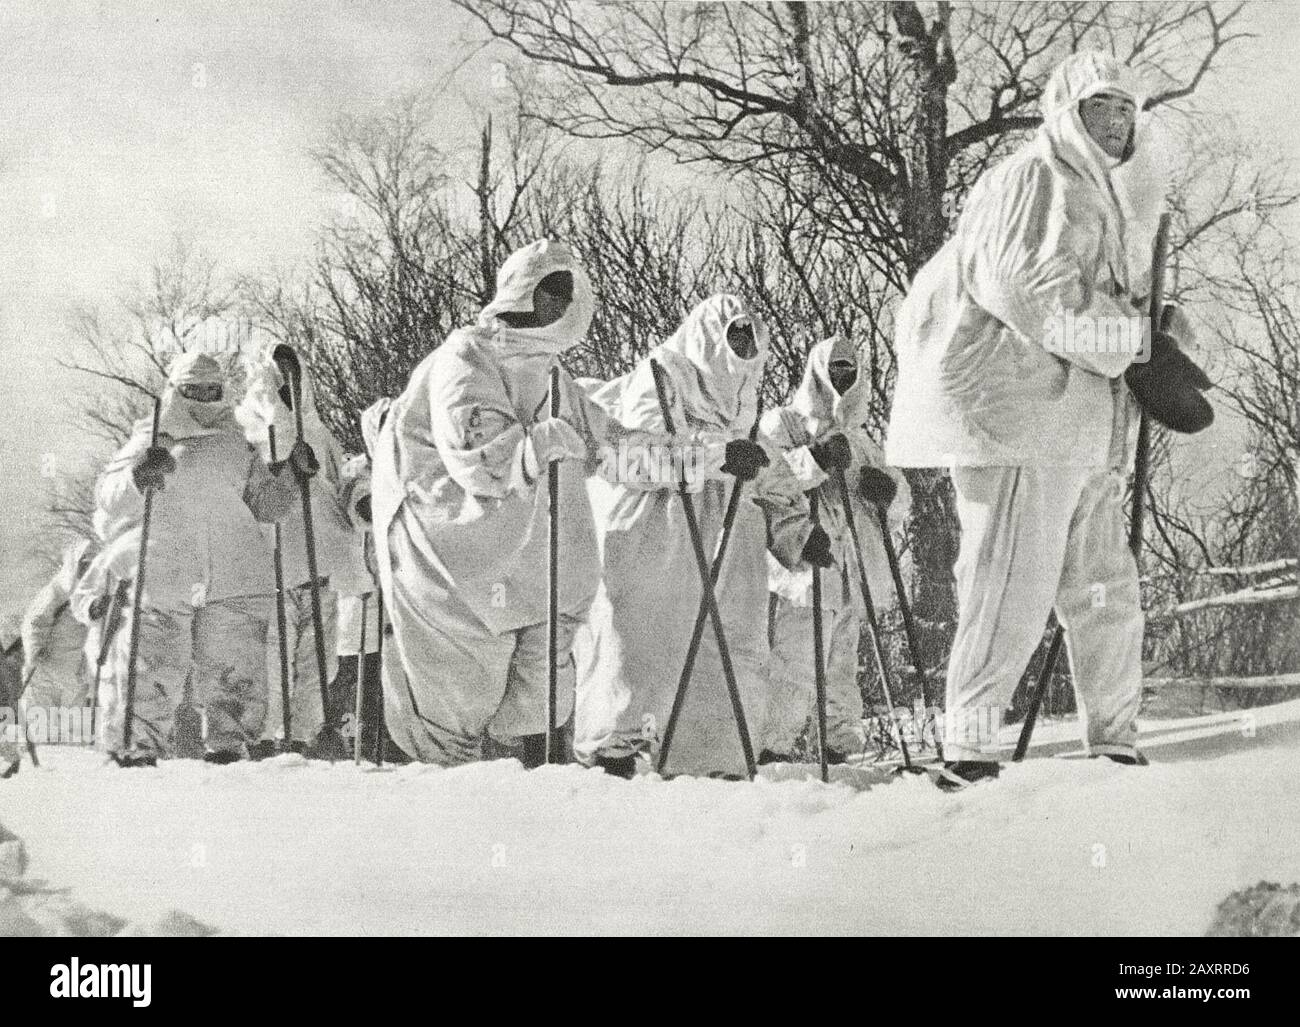 Red Army in 1930s. From soviet propaganda book of 1937. Soviet soldiers on skis in winter camouflage coats Stock Photo